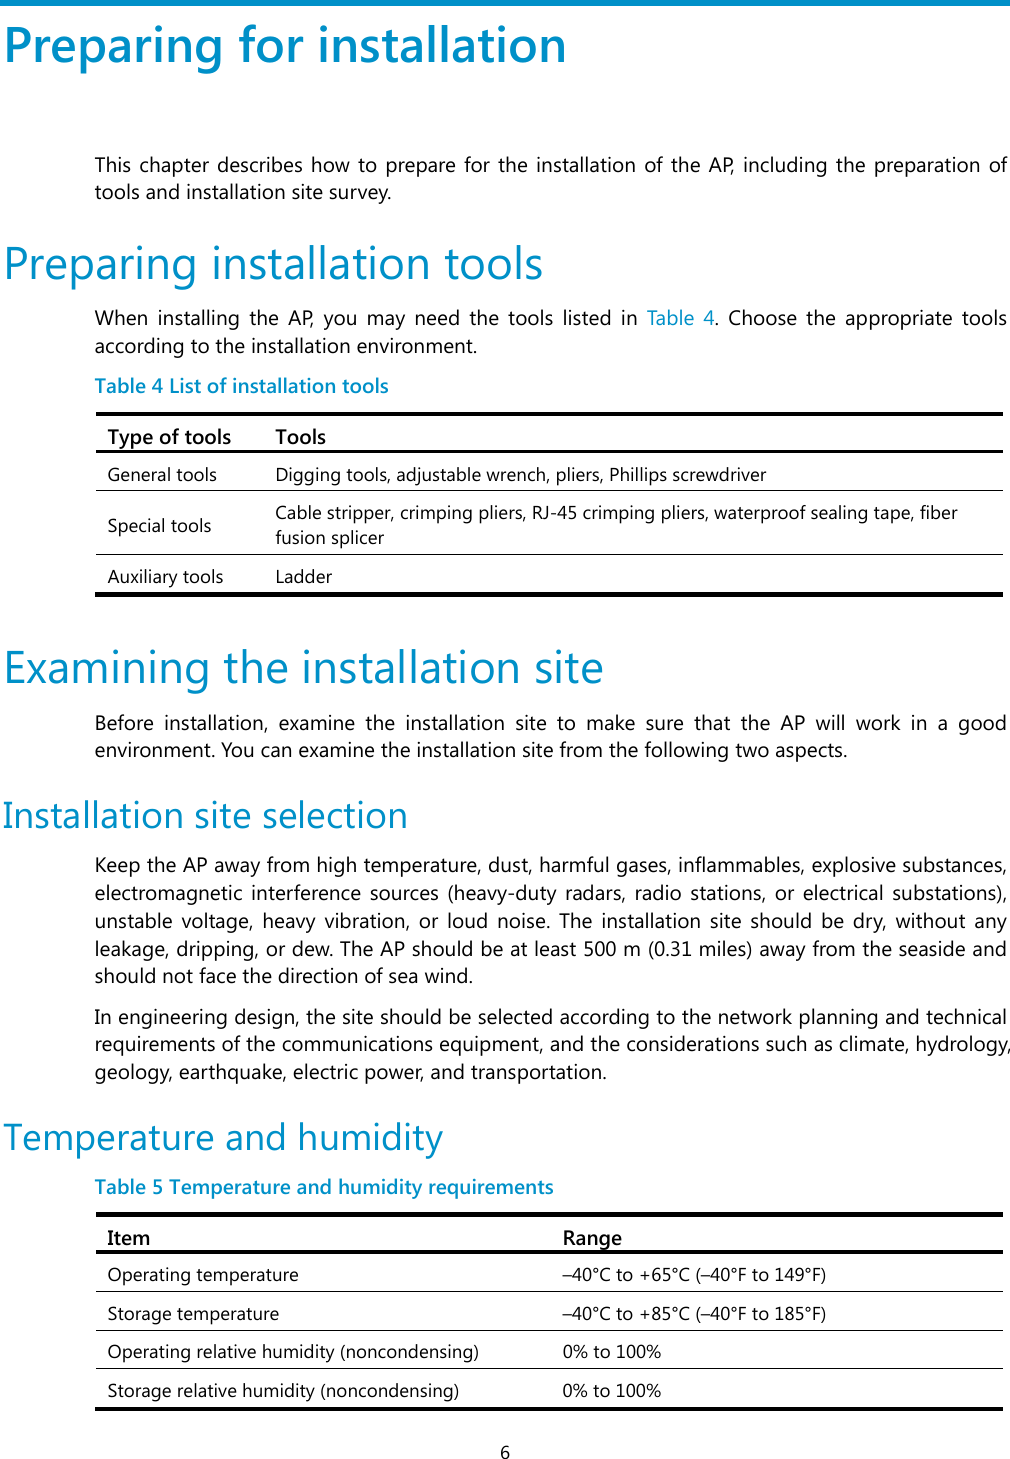  6 Preparing for installation This chapter describes how to prepare for the installation of the AP, including the preparation of tools and installation site survey.  Preparing installation tools When installing the AP, you may need the tools listed in Table 4. Choose the appropriate tools according to the installation environment.  Table 4 List of installation tools Type of tools  Tools General tools  Digging tools, adjustable wrench, pliers, Phillips screwdriver  Special tools  Cable stripper, crimping pliers, RJ-45 crimping pliers, waterproof sealing tape, fiber fusion splicer  Auxiliary tools  Ladder  Examining the installation site Before installation, examine the installation site to make sure that the AP will work in a good environment. You can examine the installation site from the following two aspects. Installation site selection  Keep the AP away from high temperature, dust, harmful gases, inflammables, explosive substances, electromagnetic interference sources (heavy-duty radars, radio stations, or electrical substations), unstable voltage, heavy vibration, or loud noise. The installation site should be dry, without any leakage, dripping, or dew. The AP should be at least 500 m (0.31 miles) away from the seaside and should not face the direction of sea wind. In engineering design, the site should be selected according to the network planning and technical requirements of the communications equipment, and the considerations such as climate, hydrology, geology, earthquake, electric power, and transportation. Temperature and humidity  Table 5 Temperature and humidity requirements  Item RangeOperating temperature  –40°C to +65°C (–40°F to 149°F) Storage temperature  –40°C to +85°C (–40°F to 185°F) Operating relative humidity (noncondensing)  0% to 100% Storage relative humidity (noncondensing) 0% to 100% 